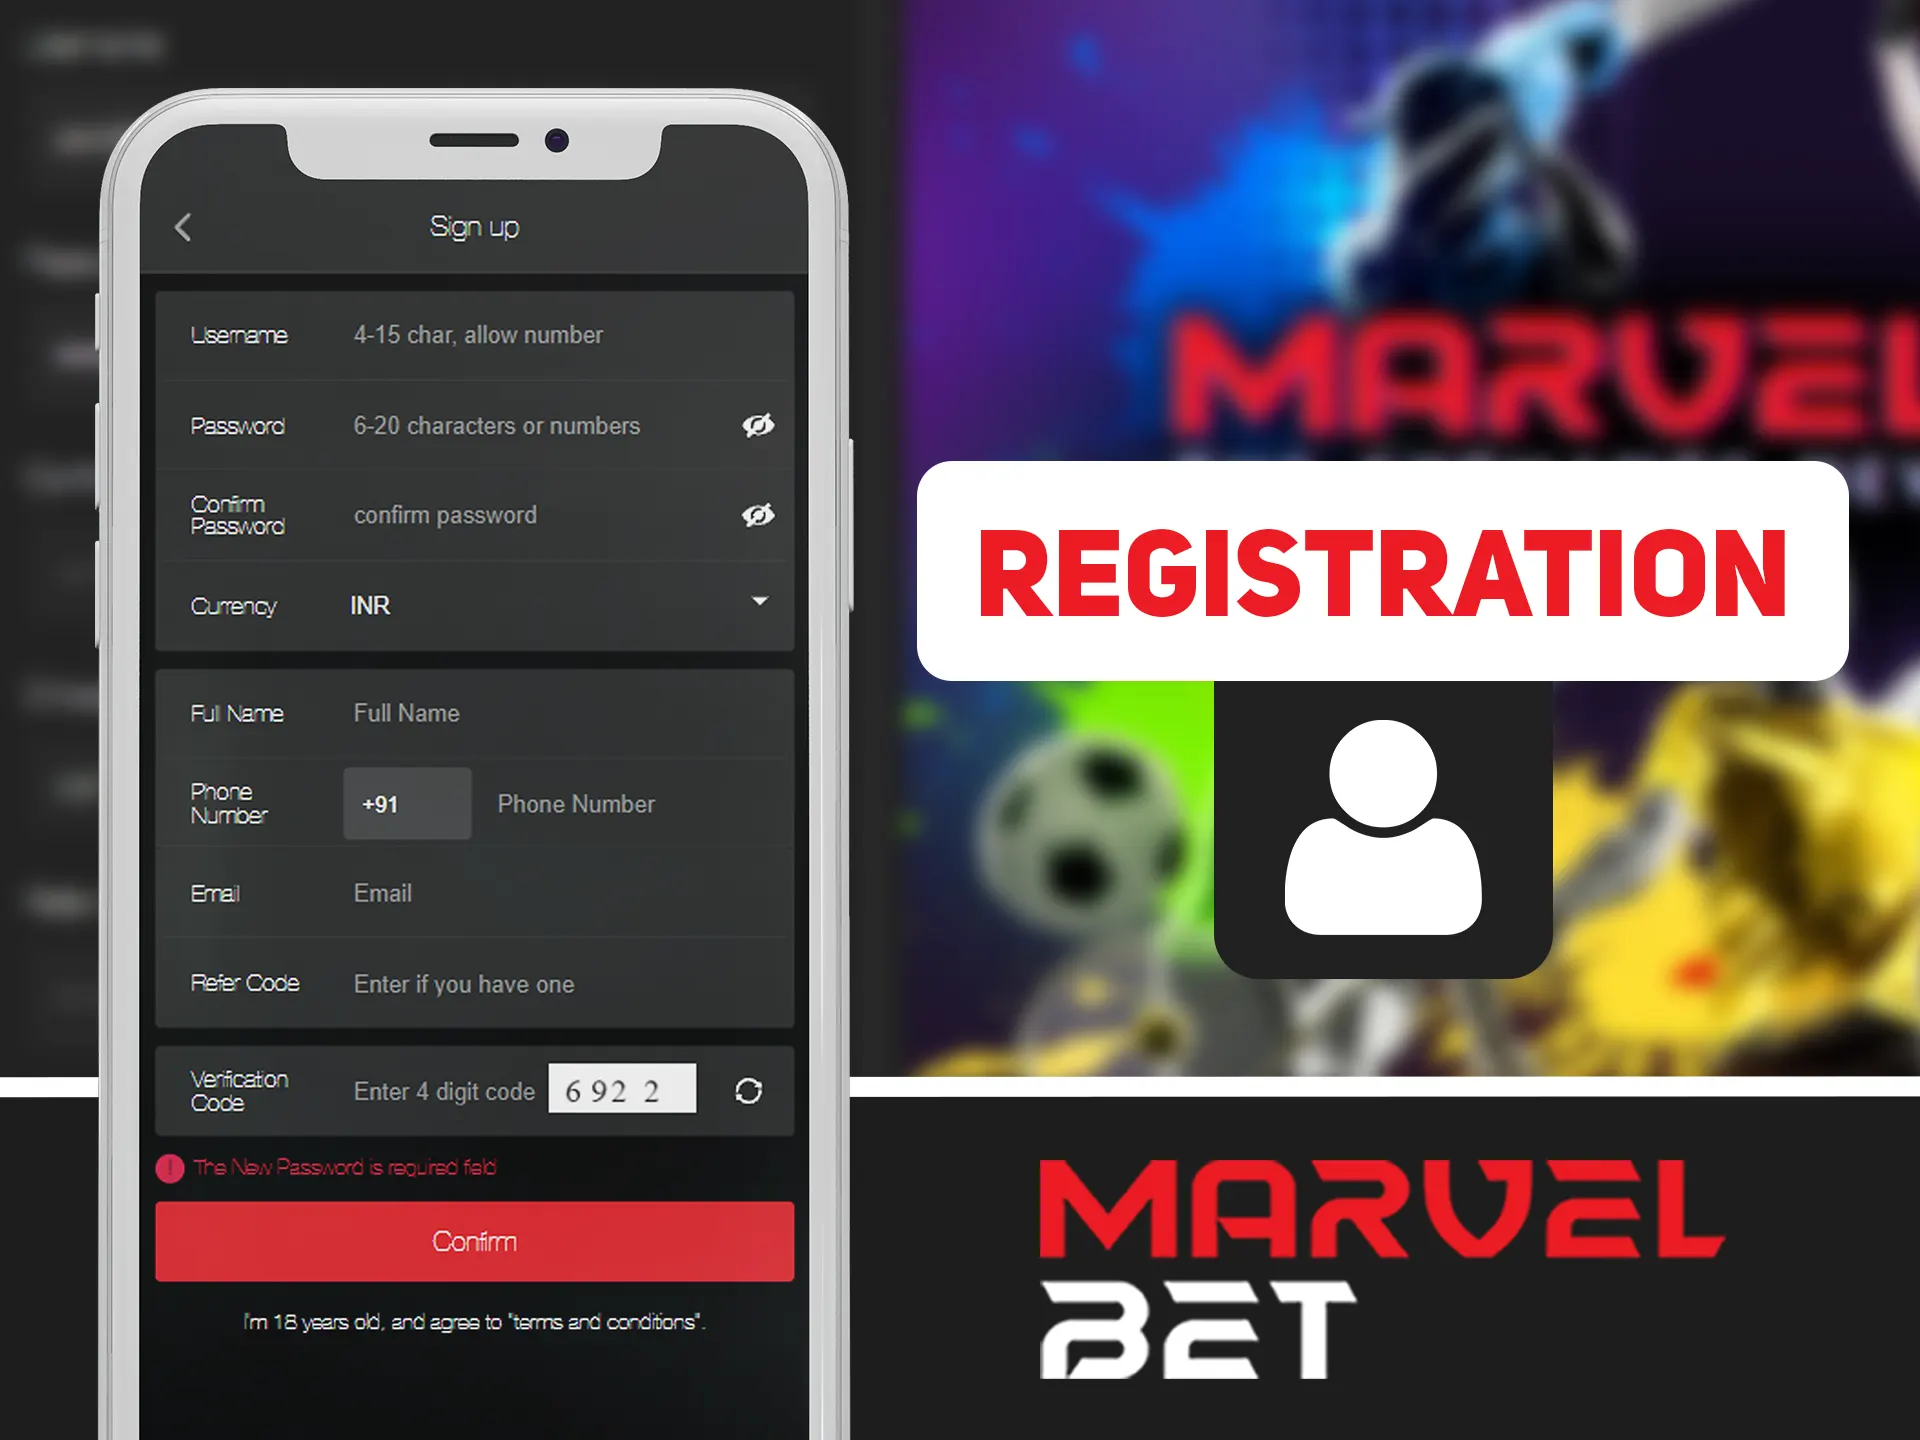 Register new Marvelbet account by using using app.